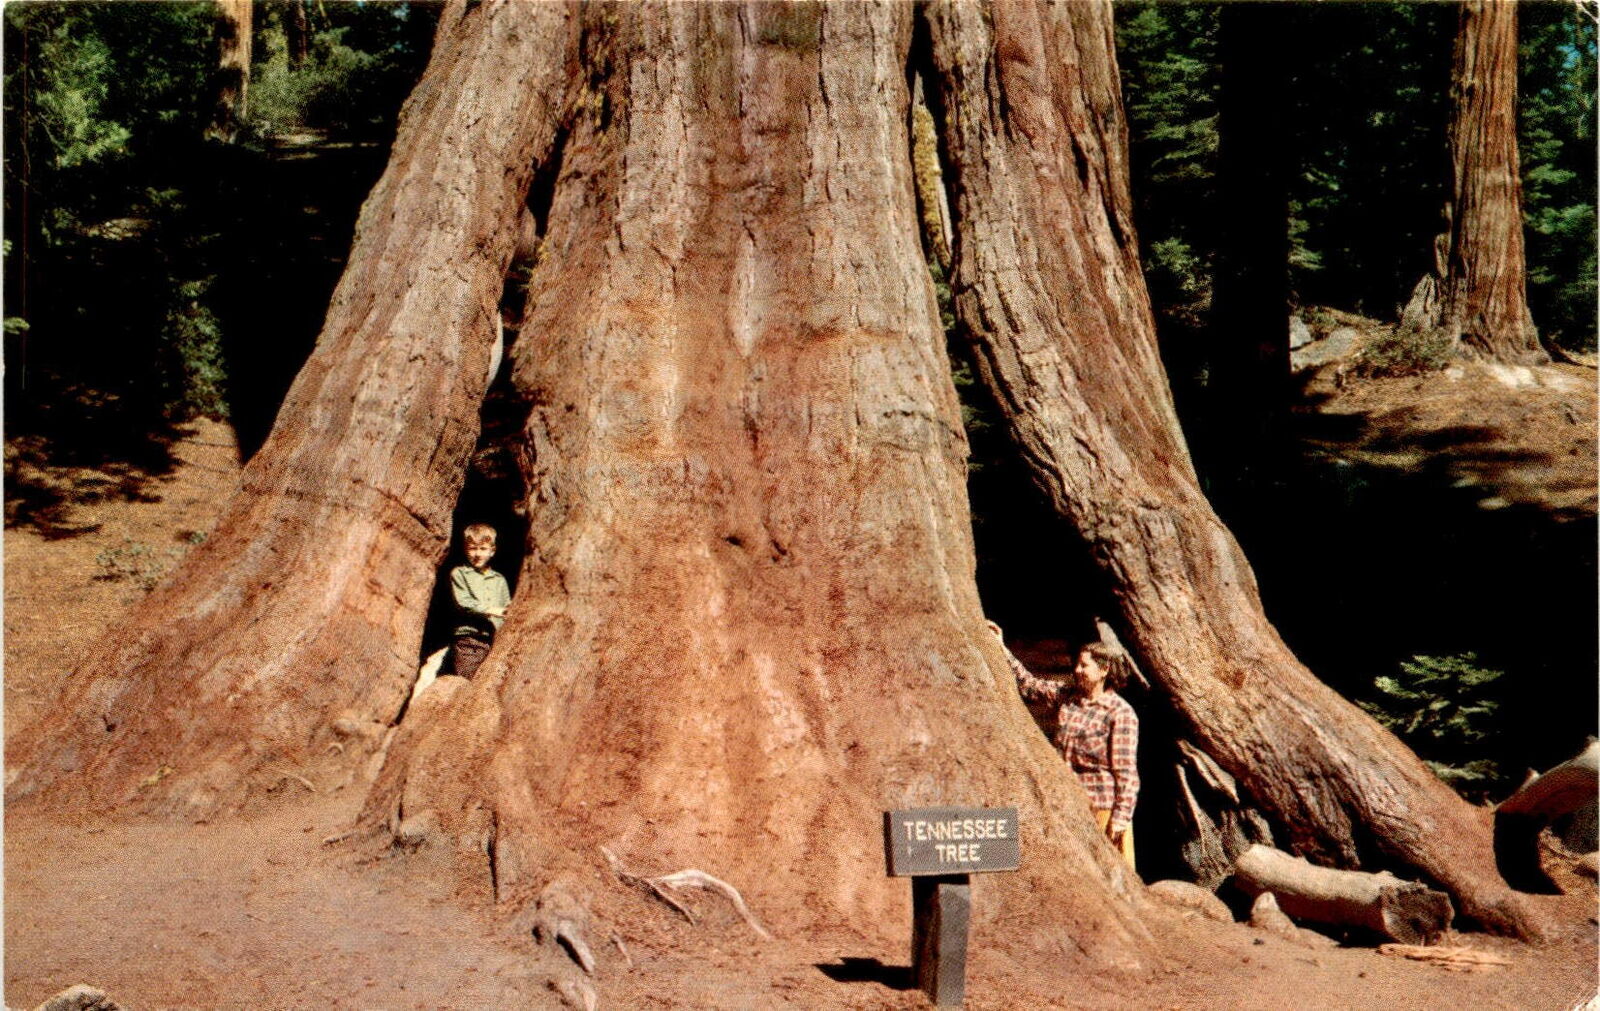 Tennessee Tree General Grant Grove Kings Canyon National Park Postcard